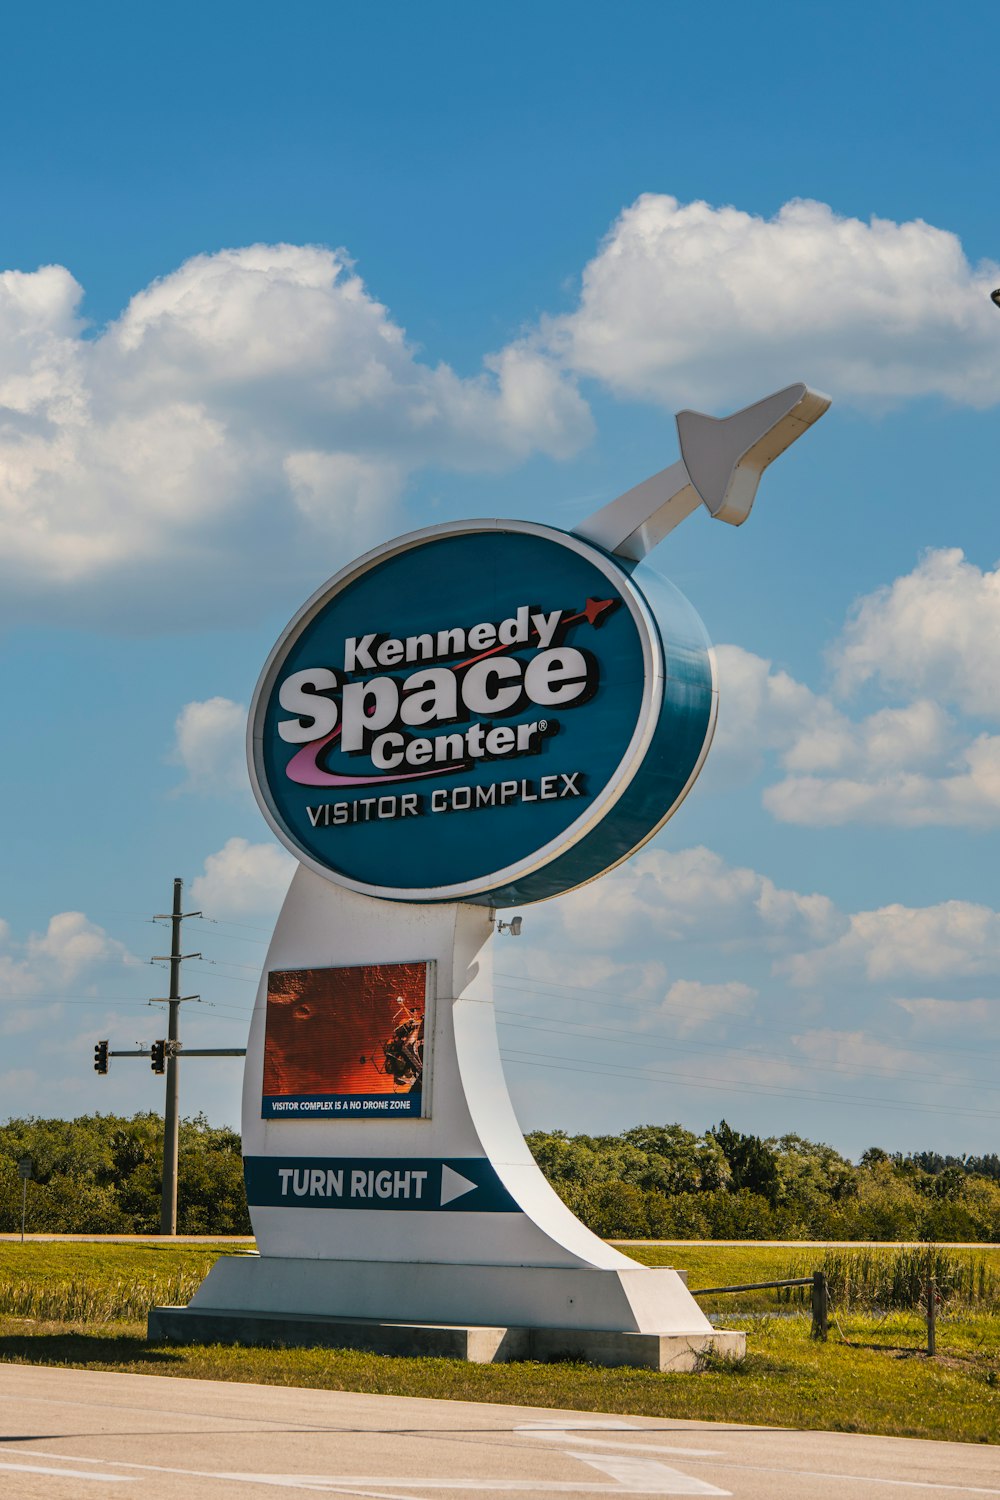 a sign for a space center with a plane flying over it